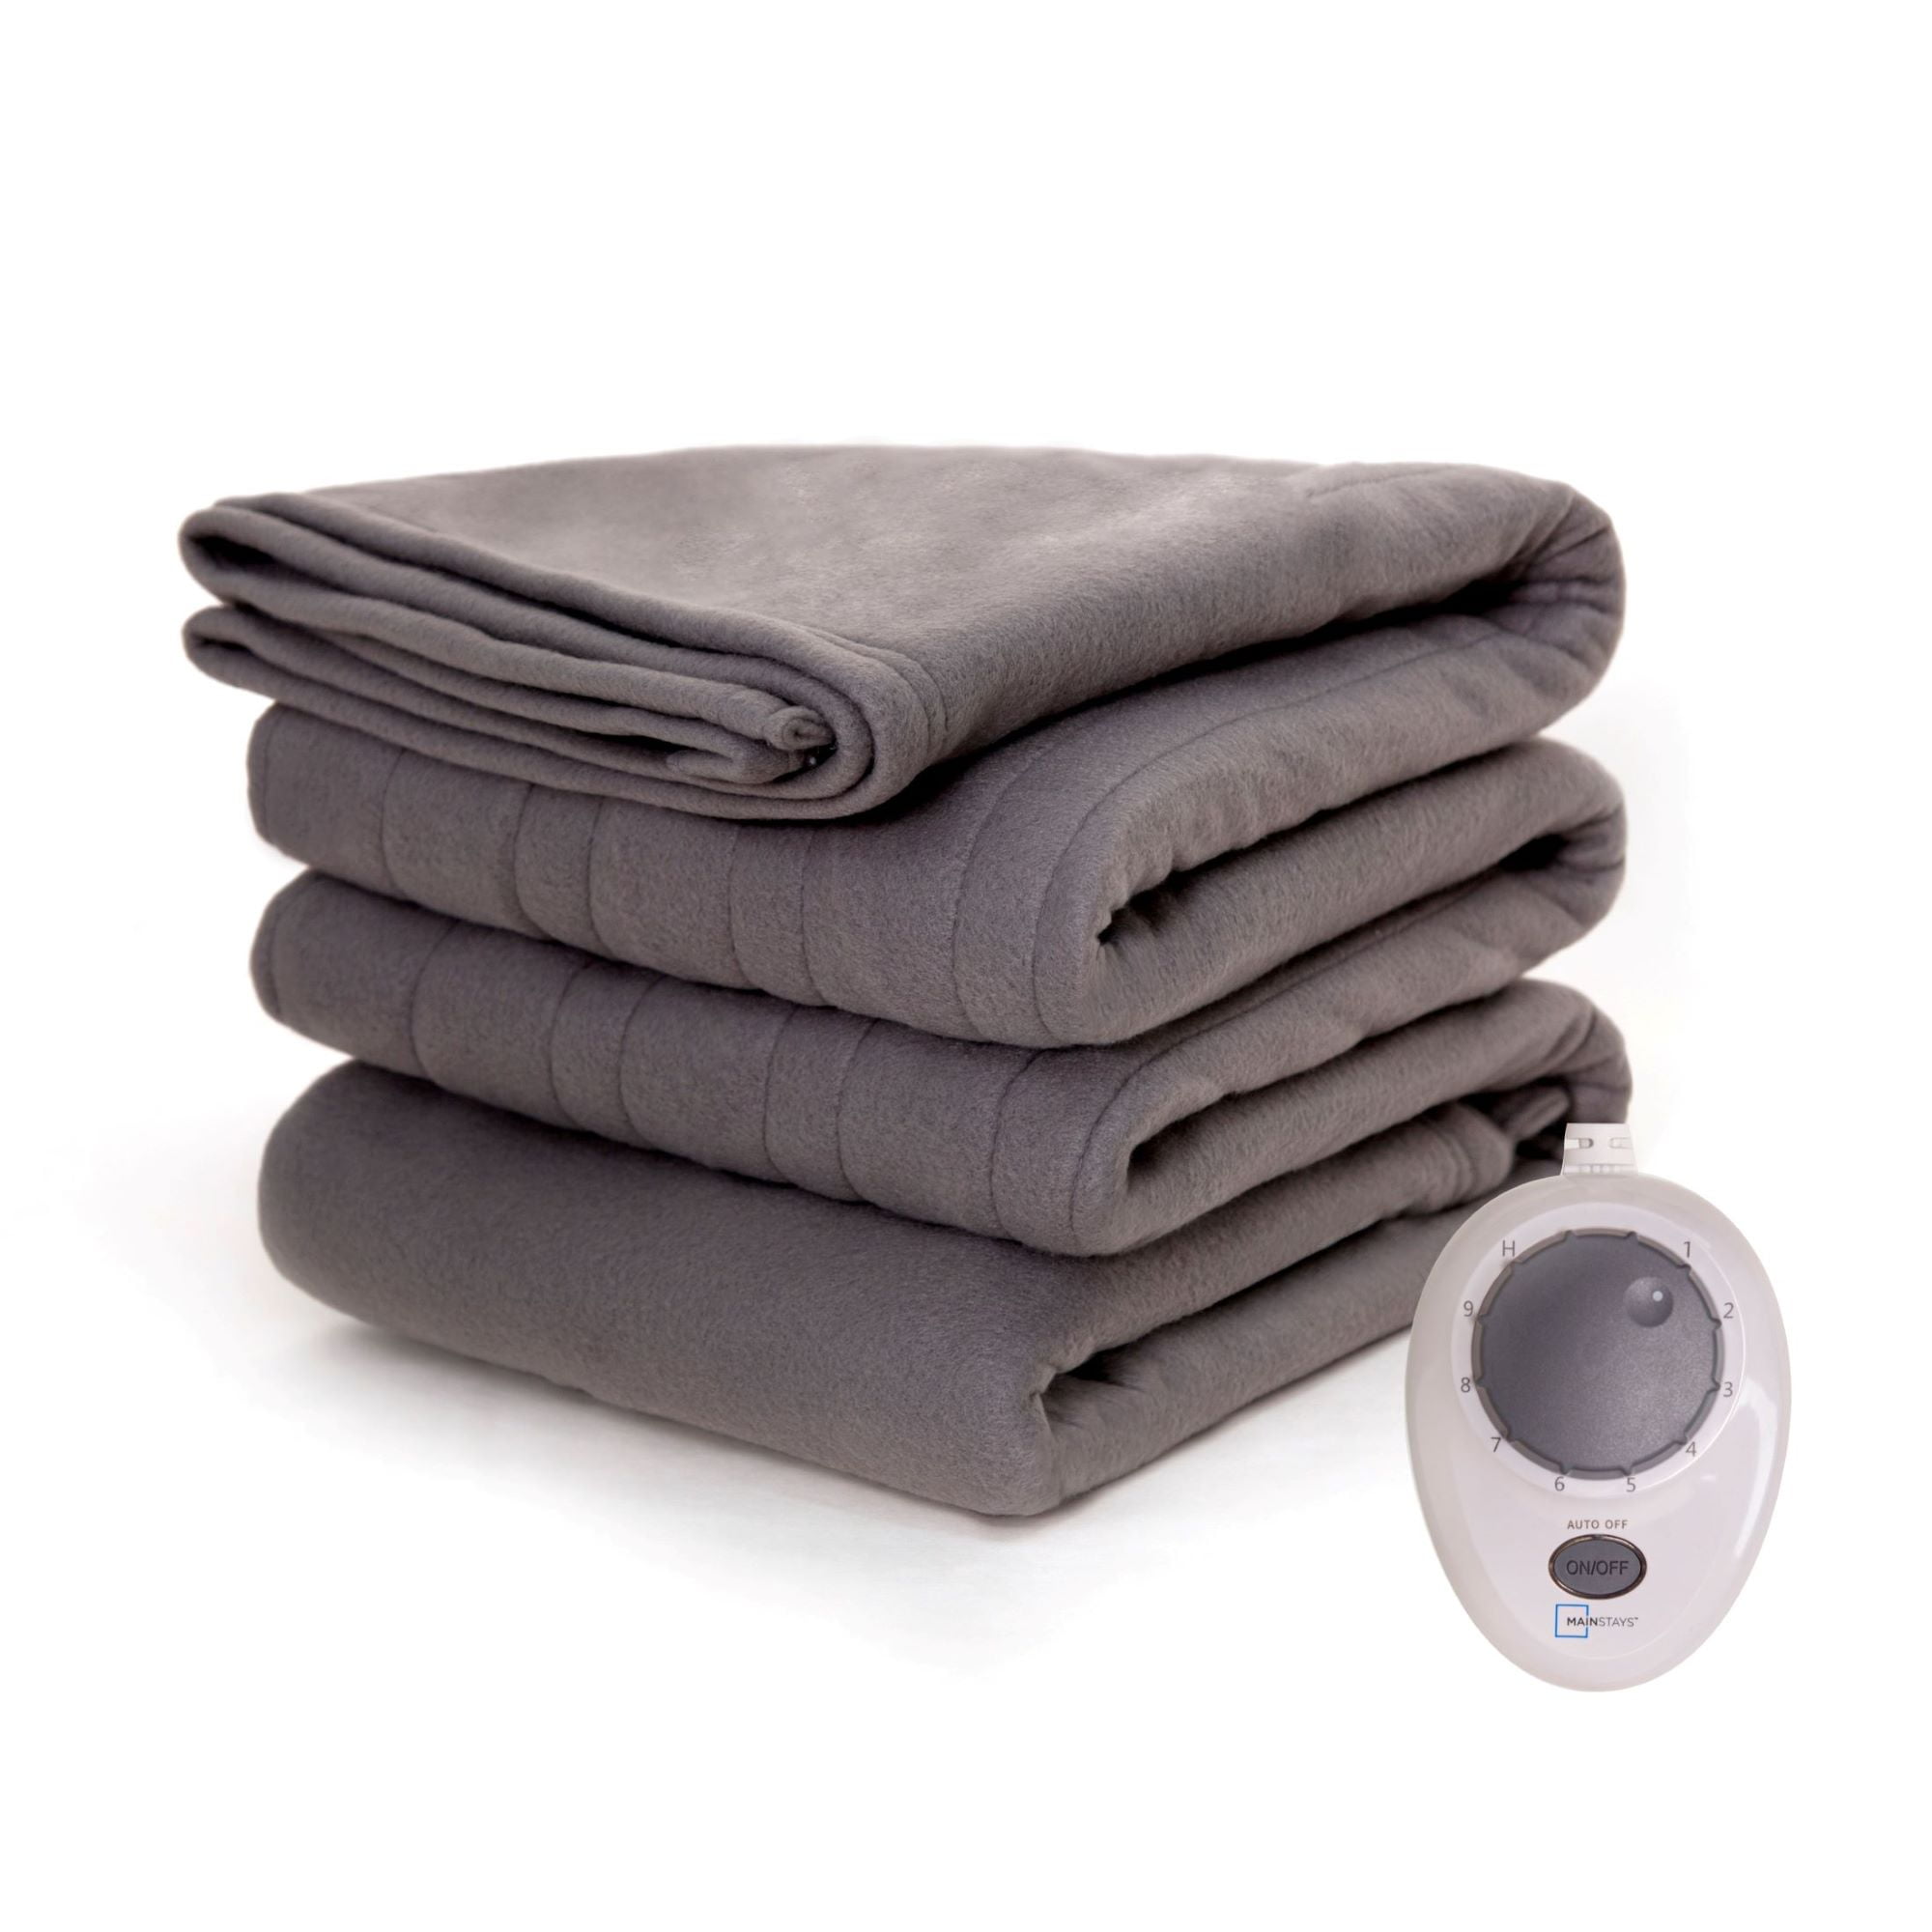 Mainstays Soft Fleece Electric Heated Blanket, Gray, Twin, 62x84, 1  controller, all ages 